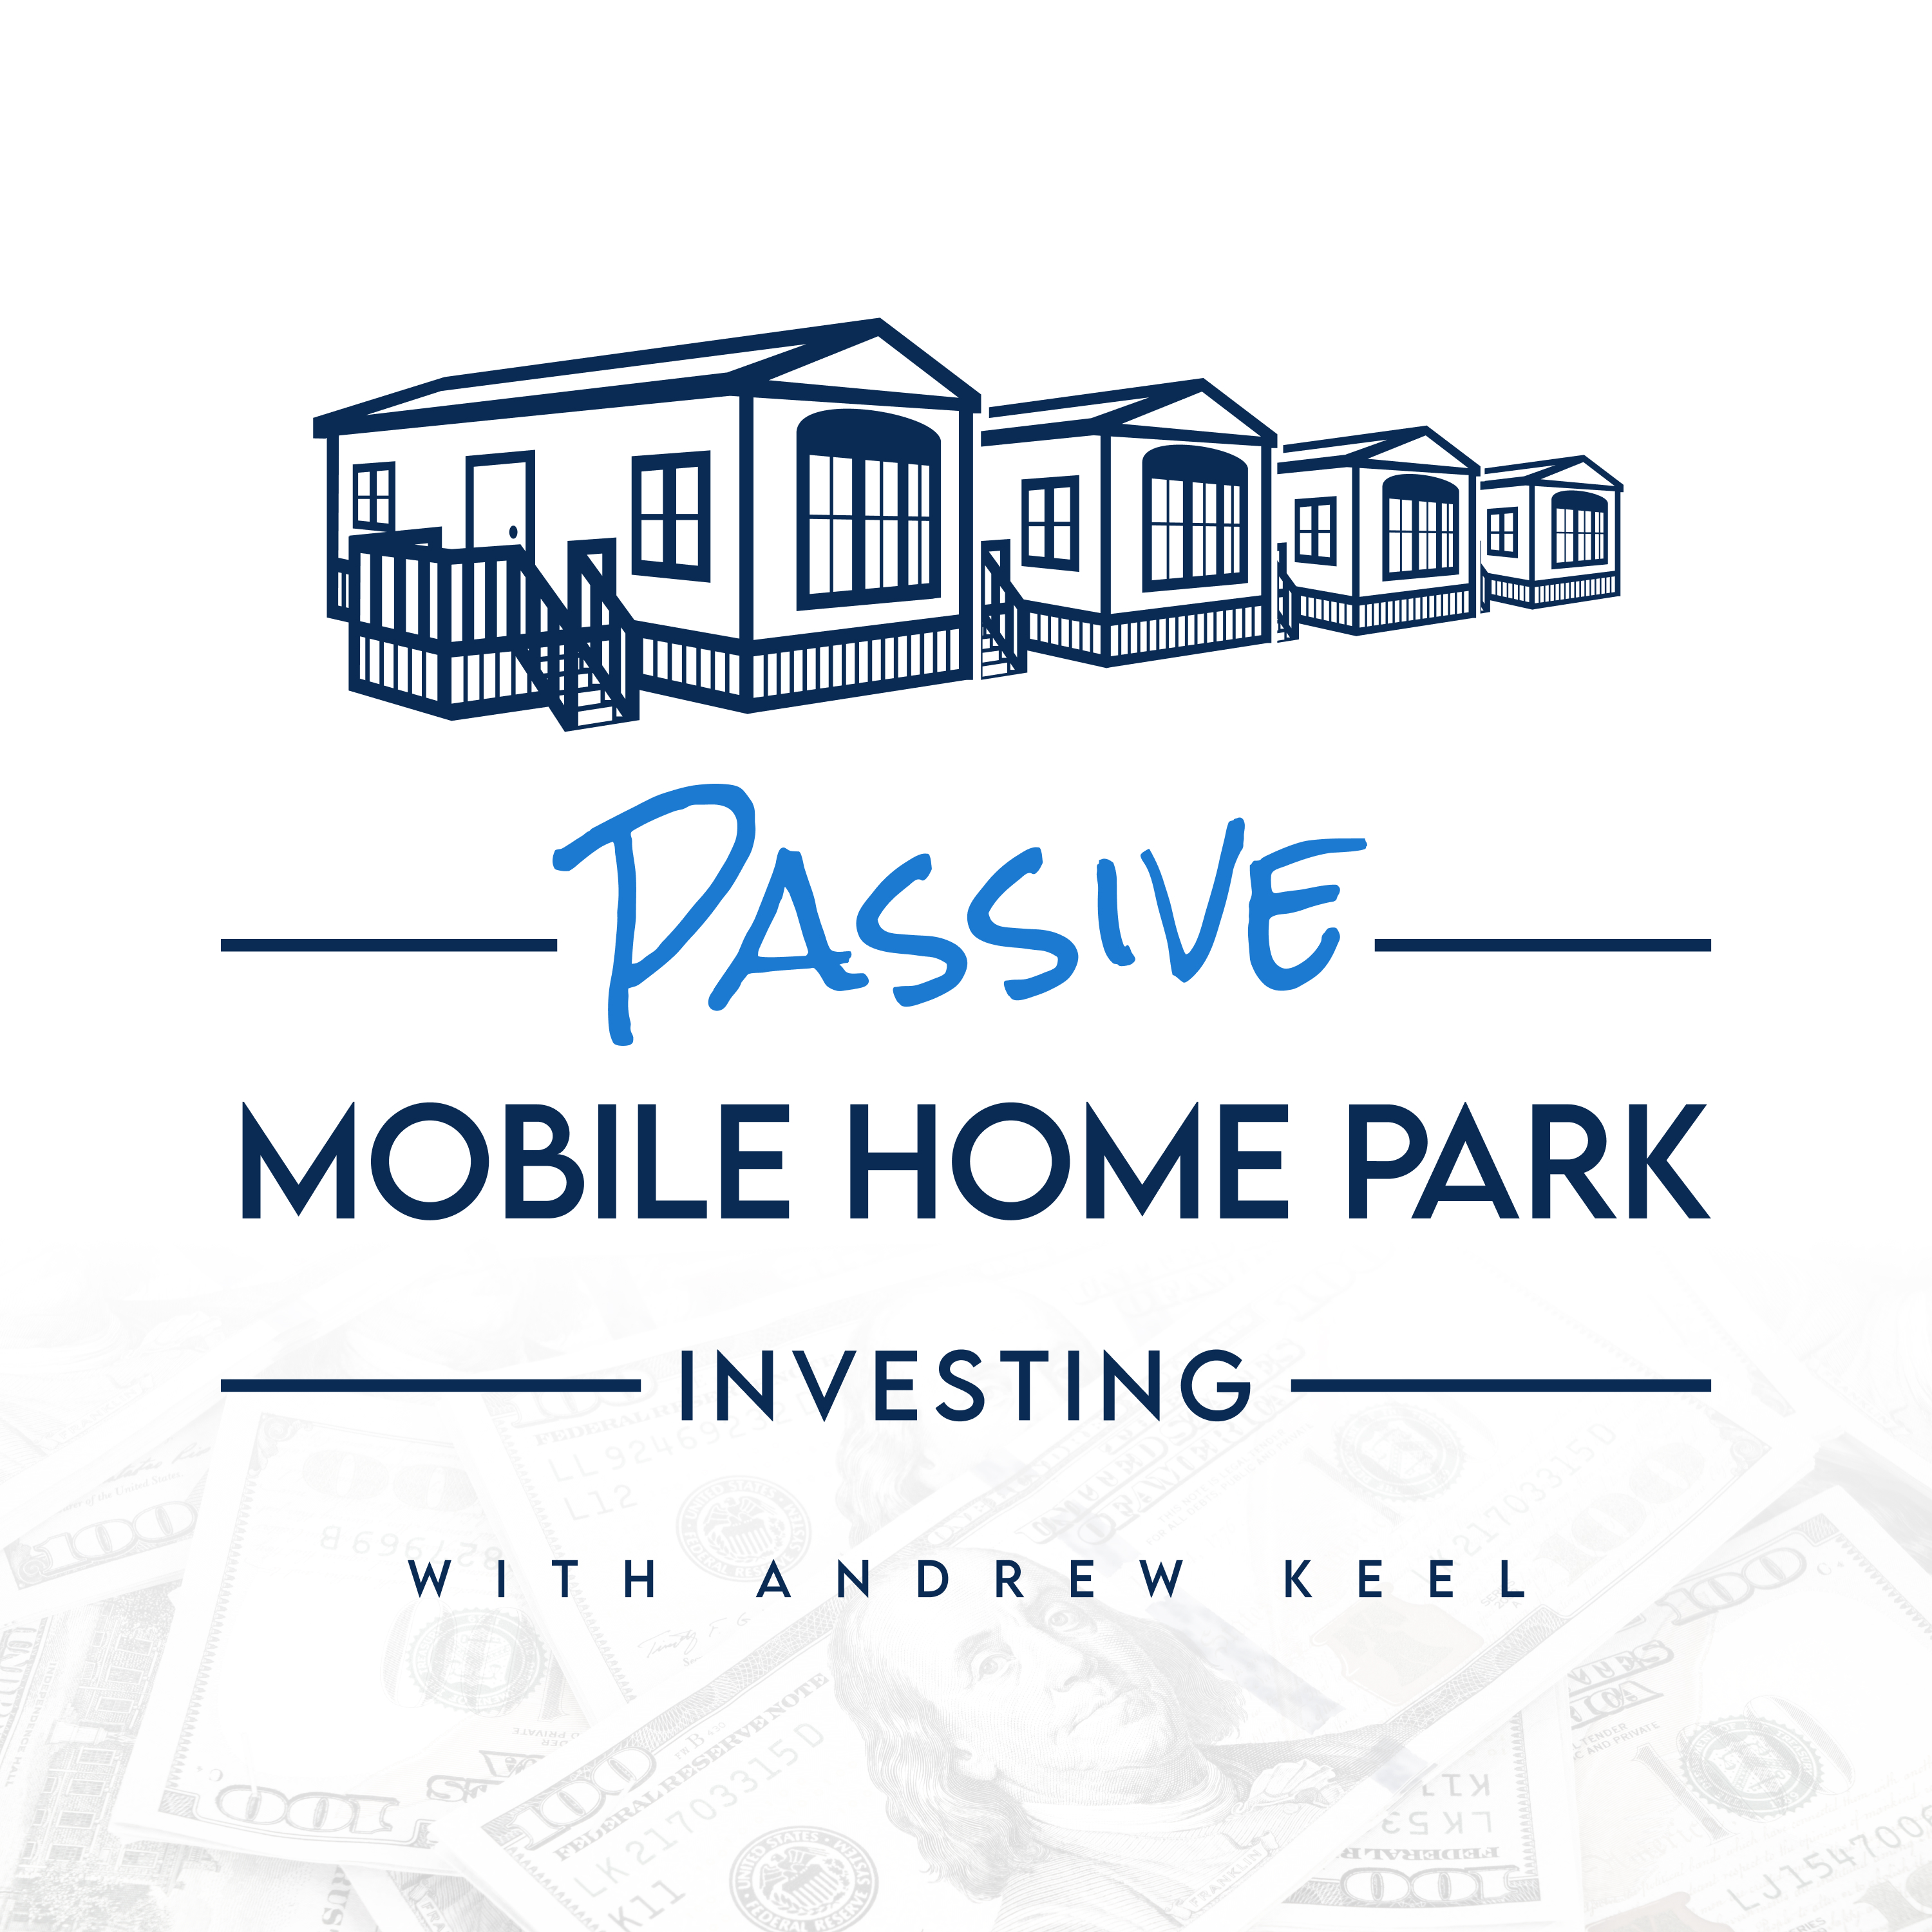 Mobile Home Parks are Recession and Inflation Resistant